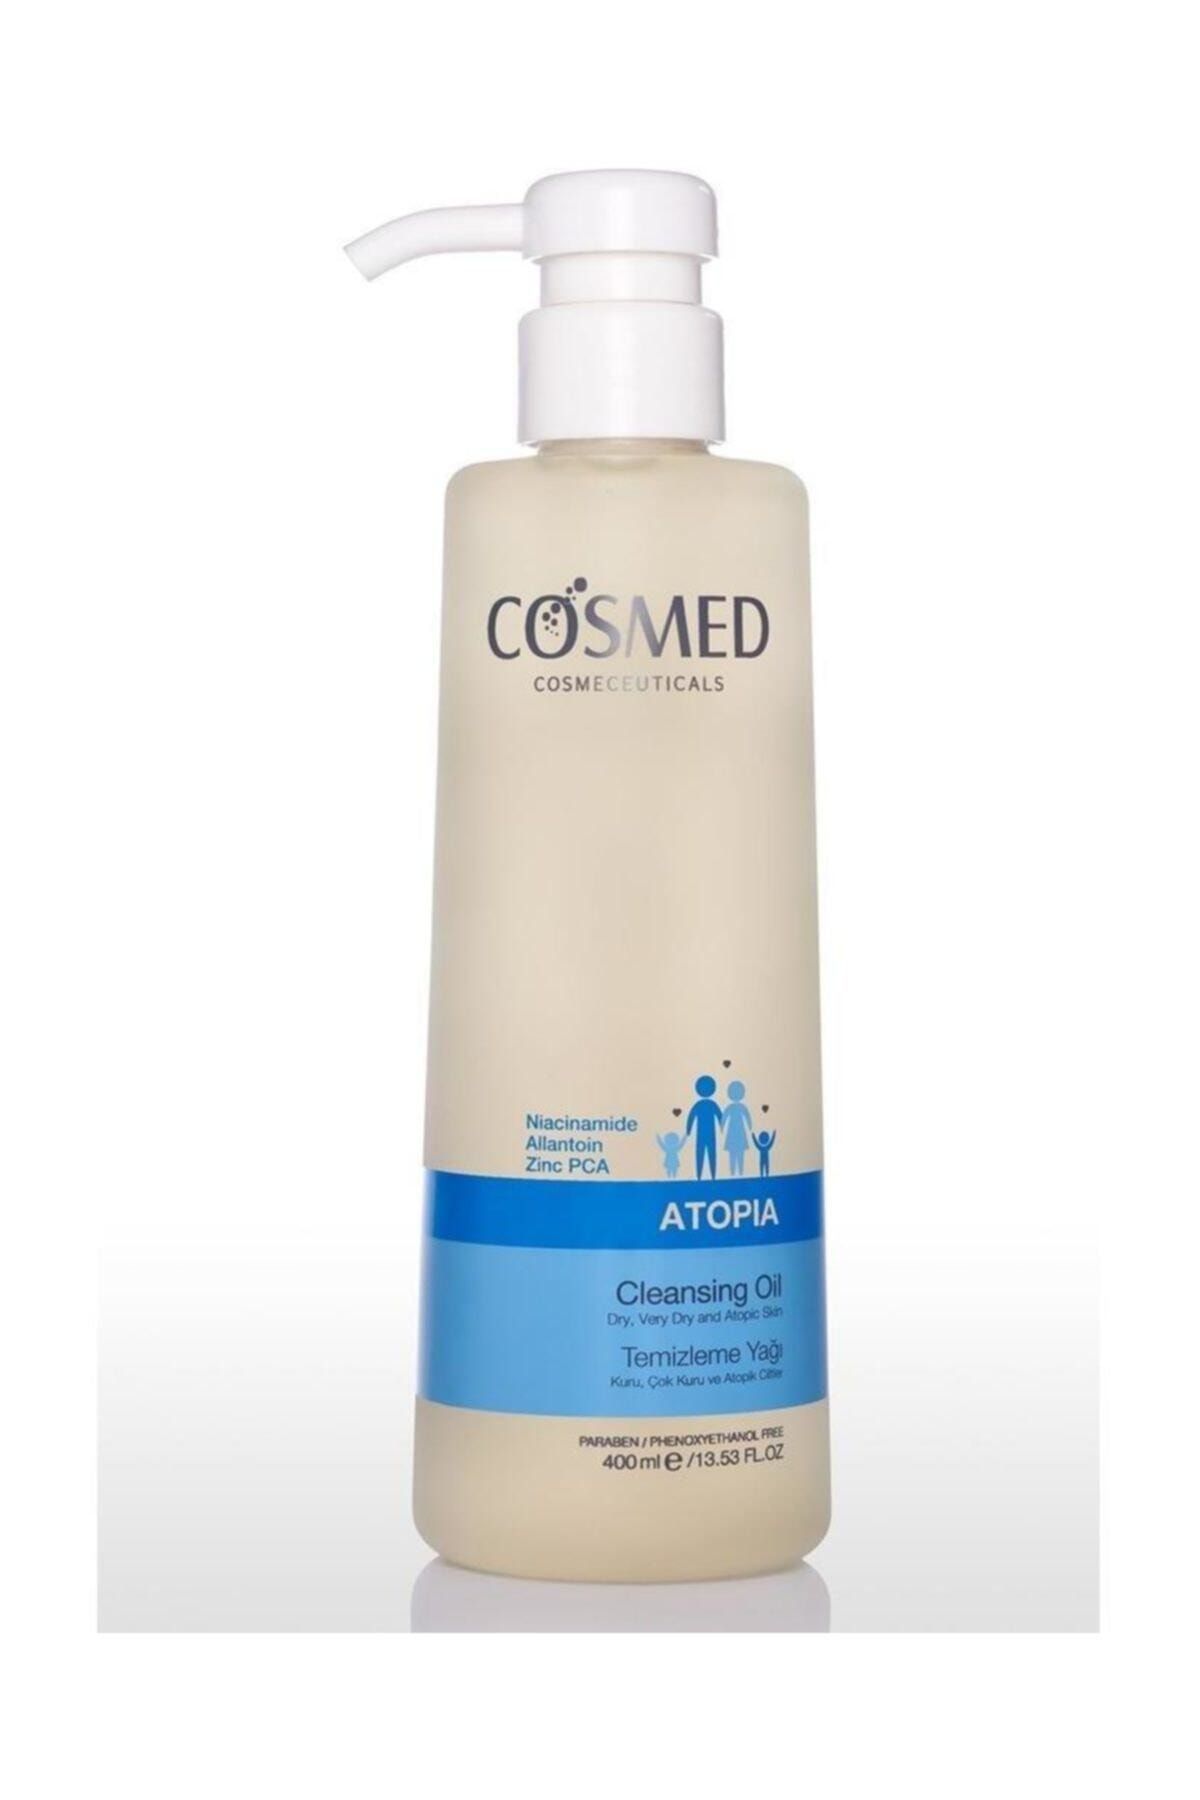 COSMED Atopia Cleansing Oil 400 Ml